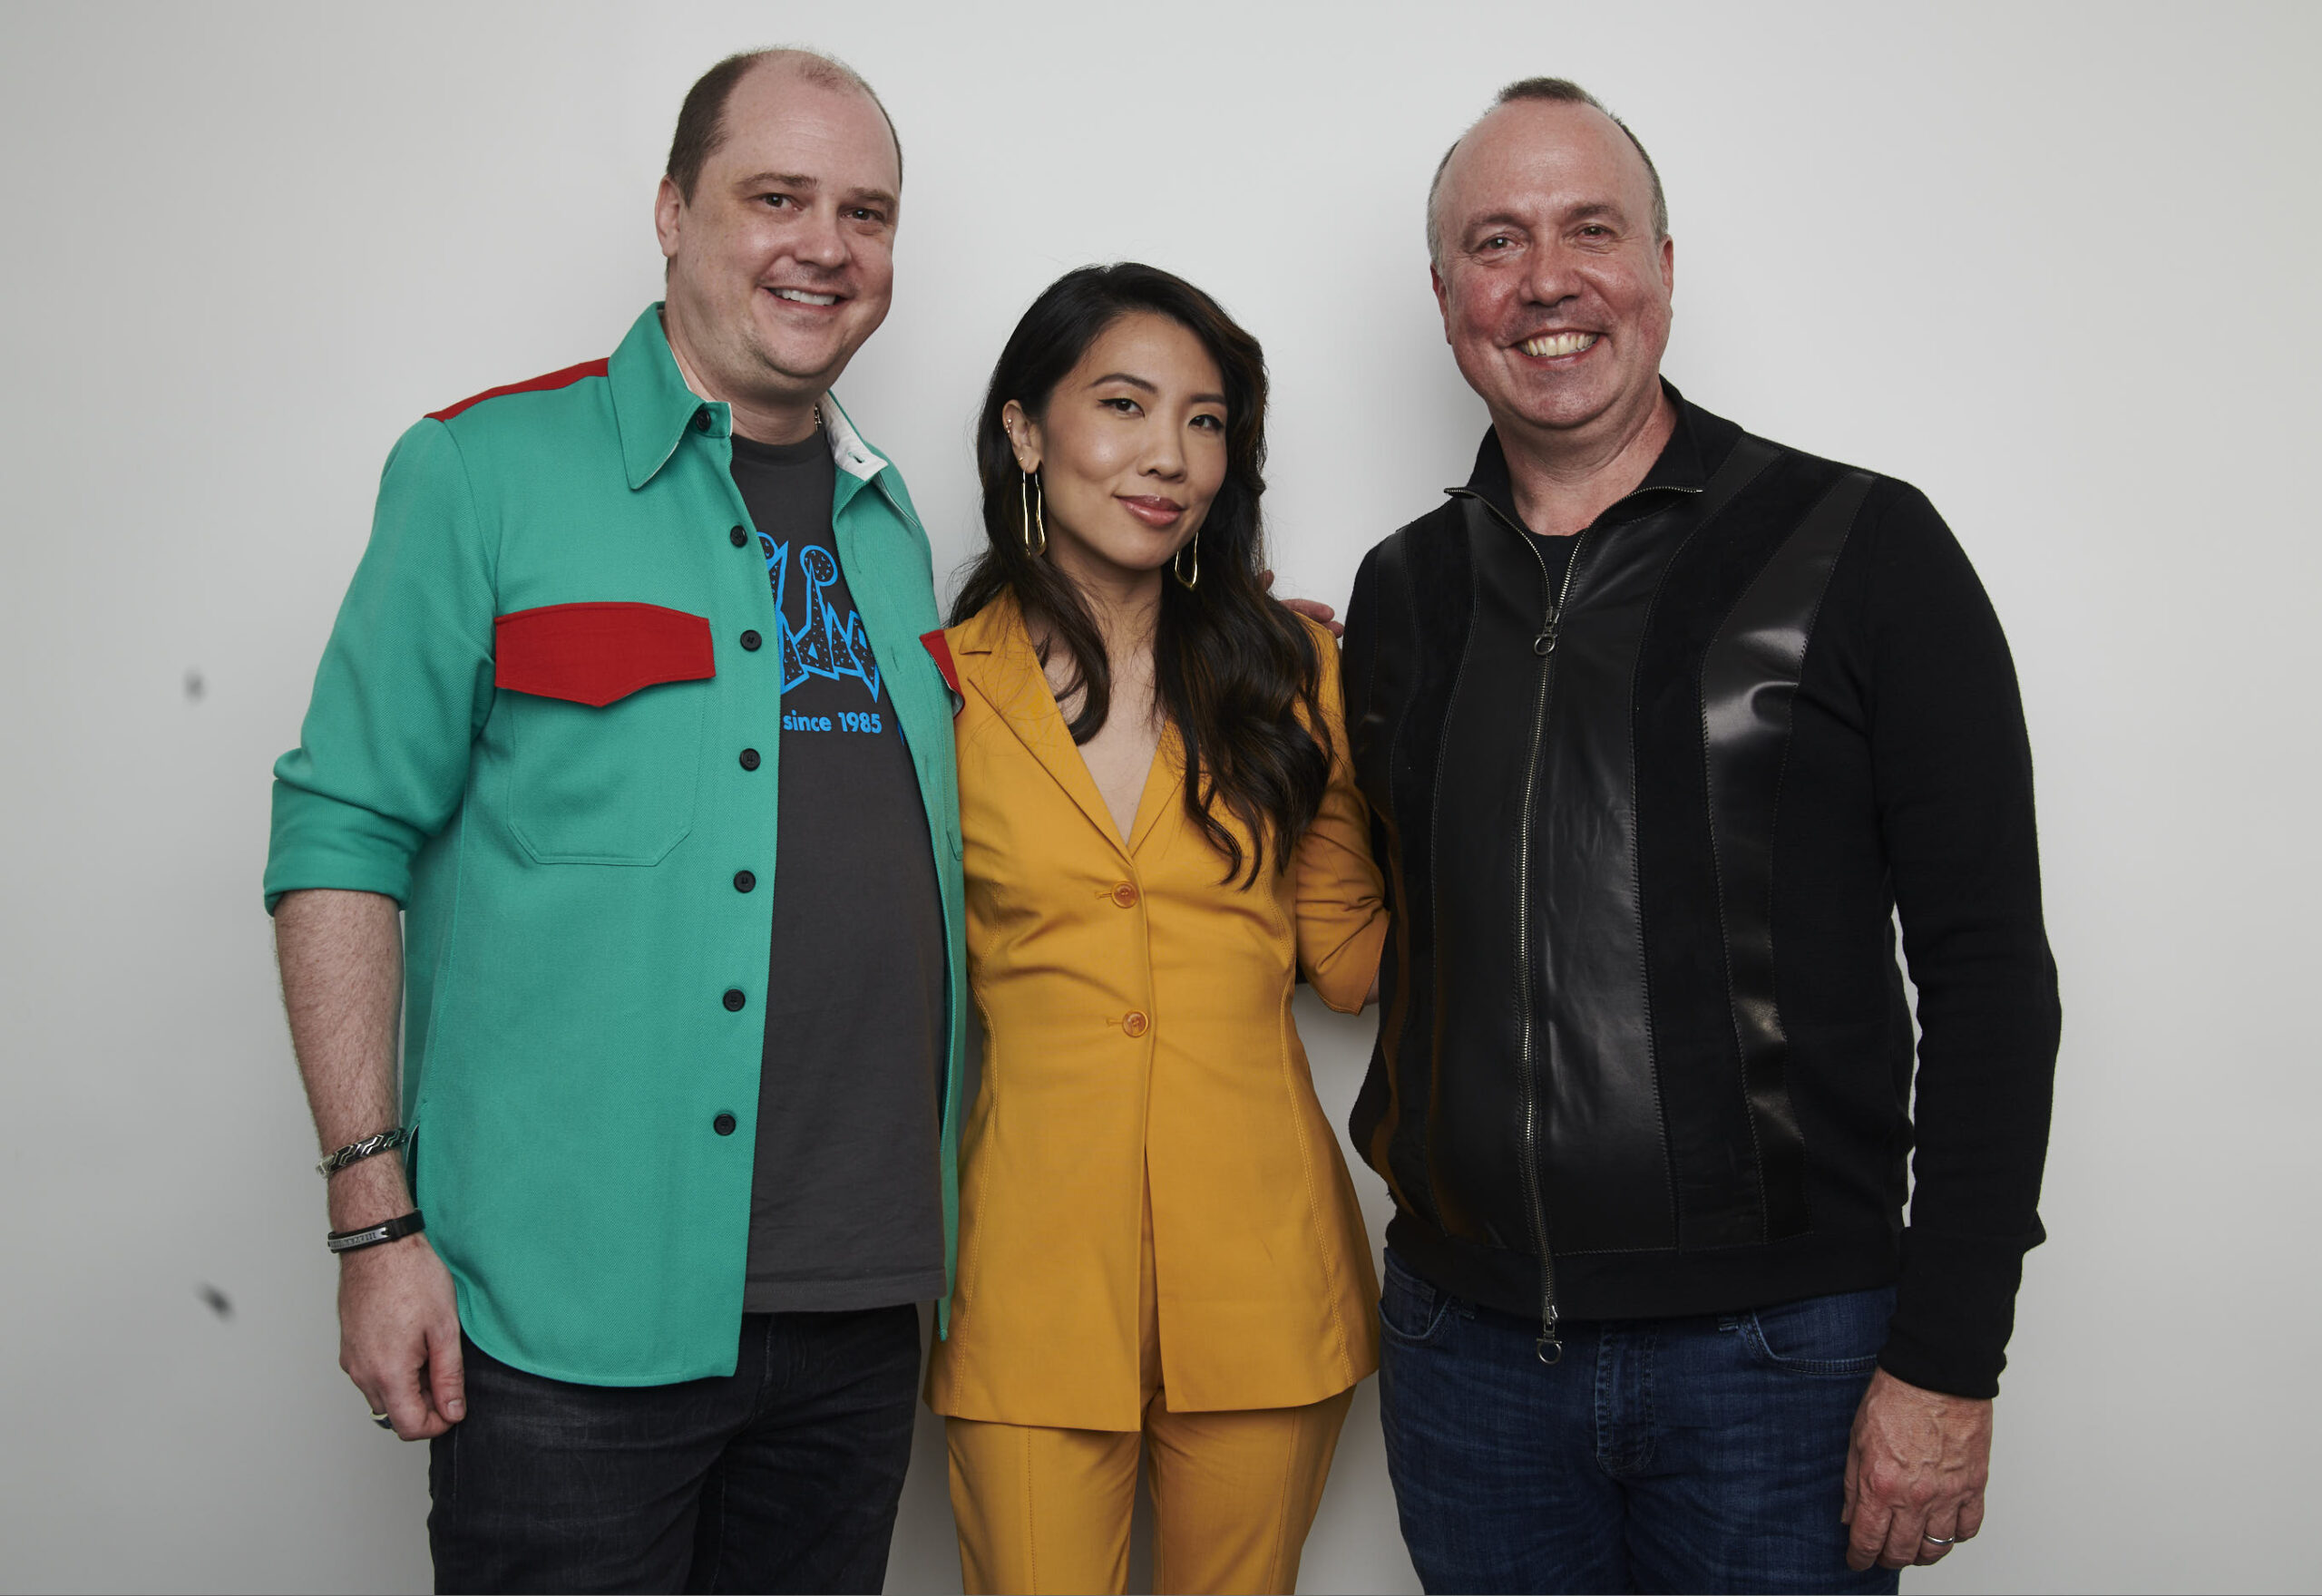 'The Midnight Club's Mike Flanagan, Leah Fong, and Trevor Macy at New York Comic Con 2022